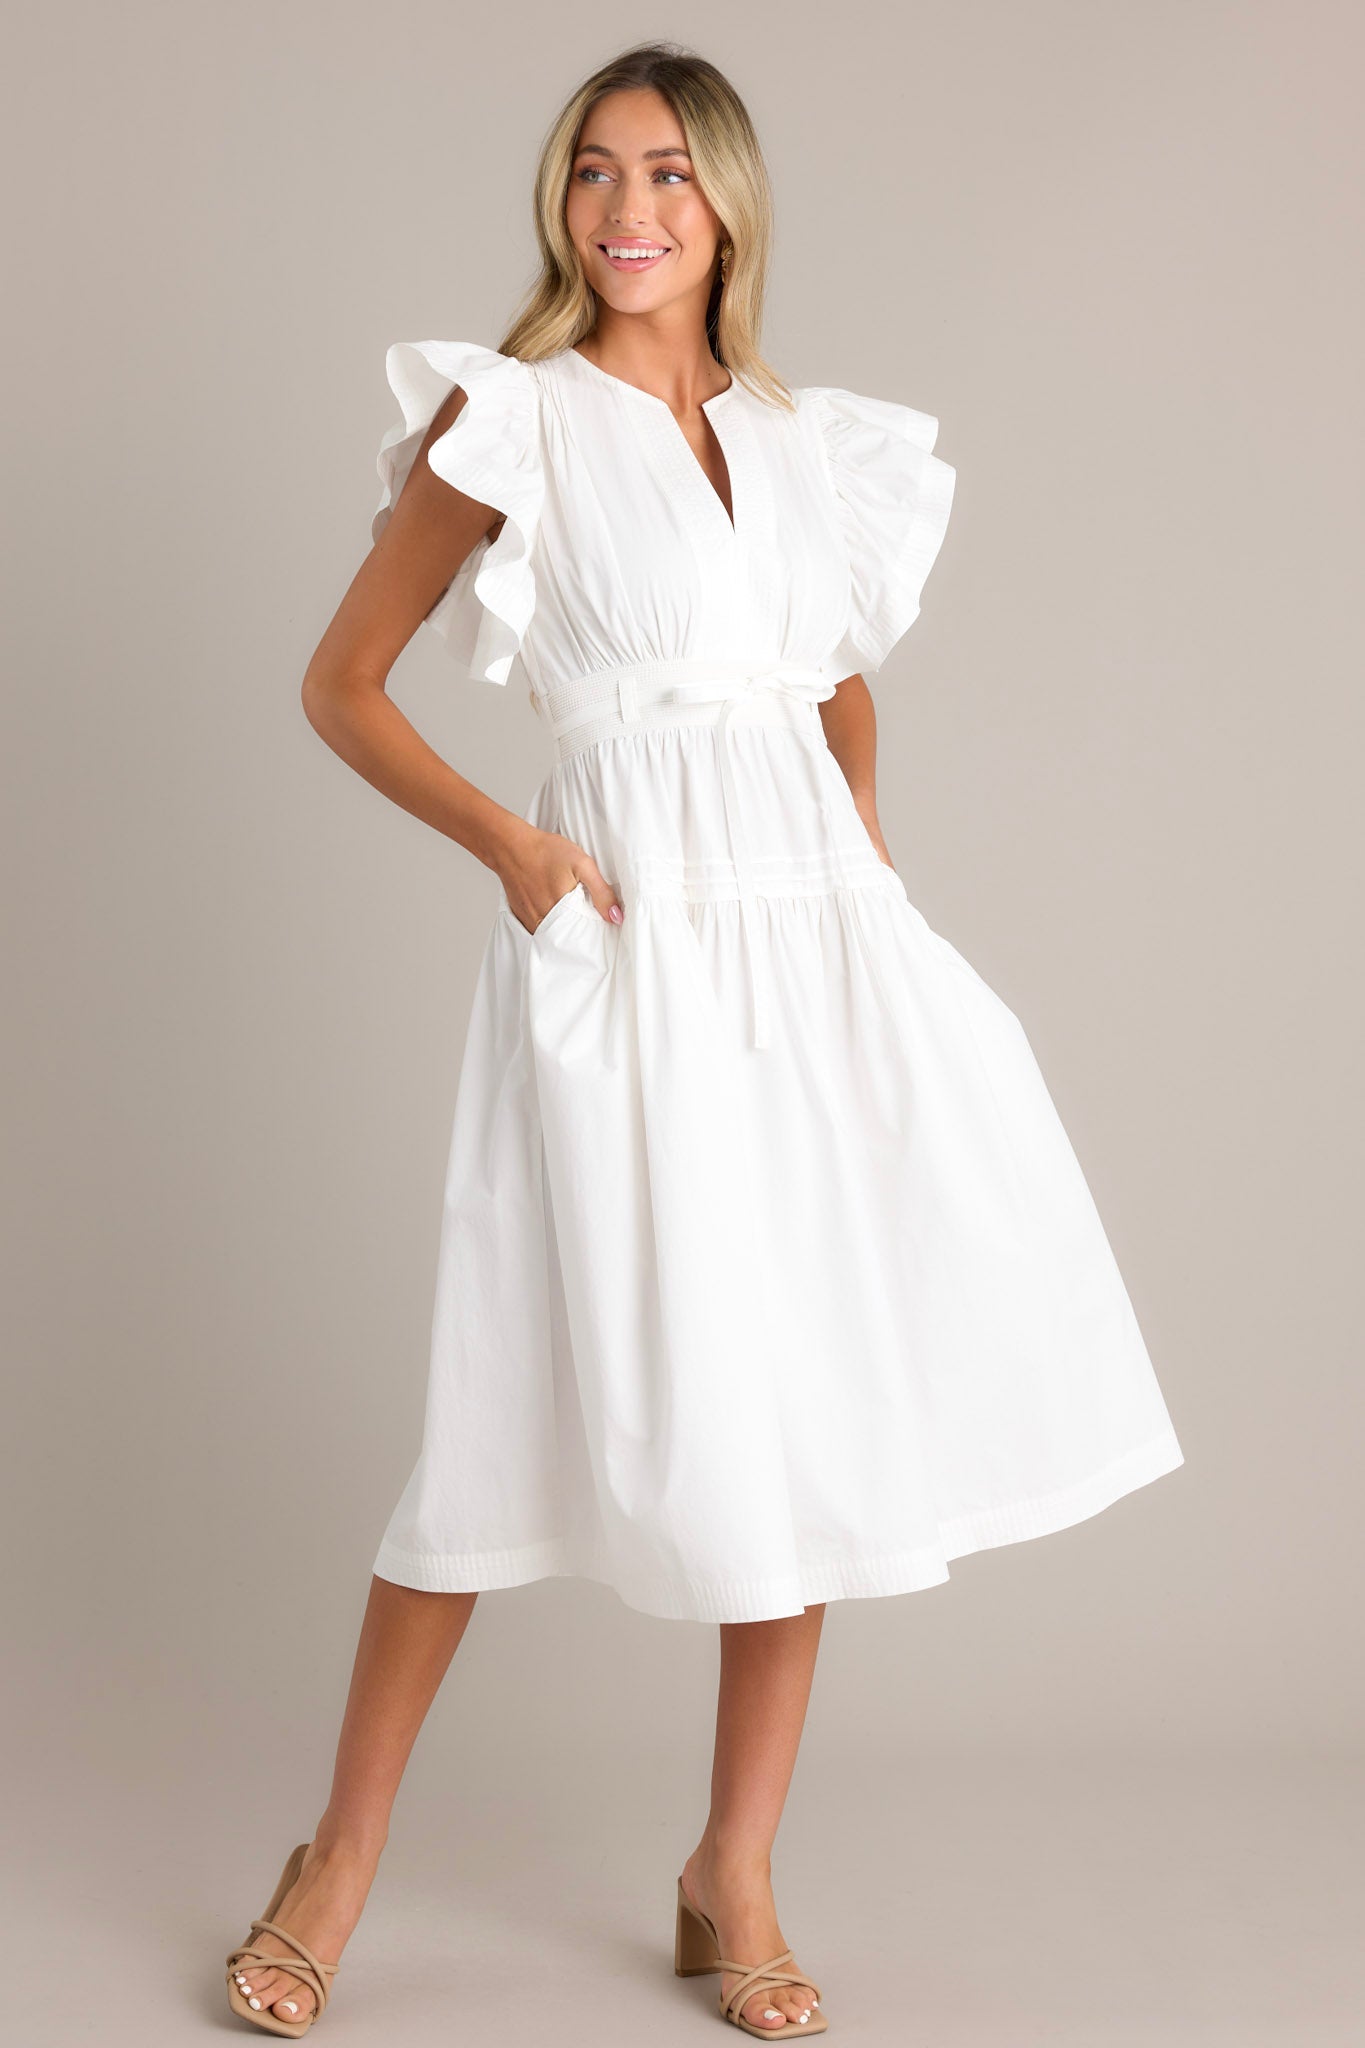 Action shot of a white midi dress highlighting the v-neckline, thick waistband with a self-tie belt, functional hip pockets, and ruffled short sleeves, showcasing the flow and movement of the dress.